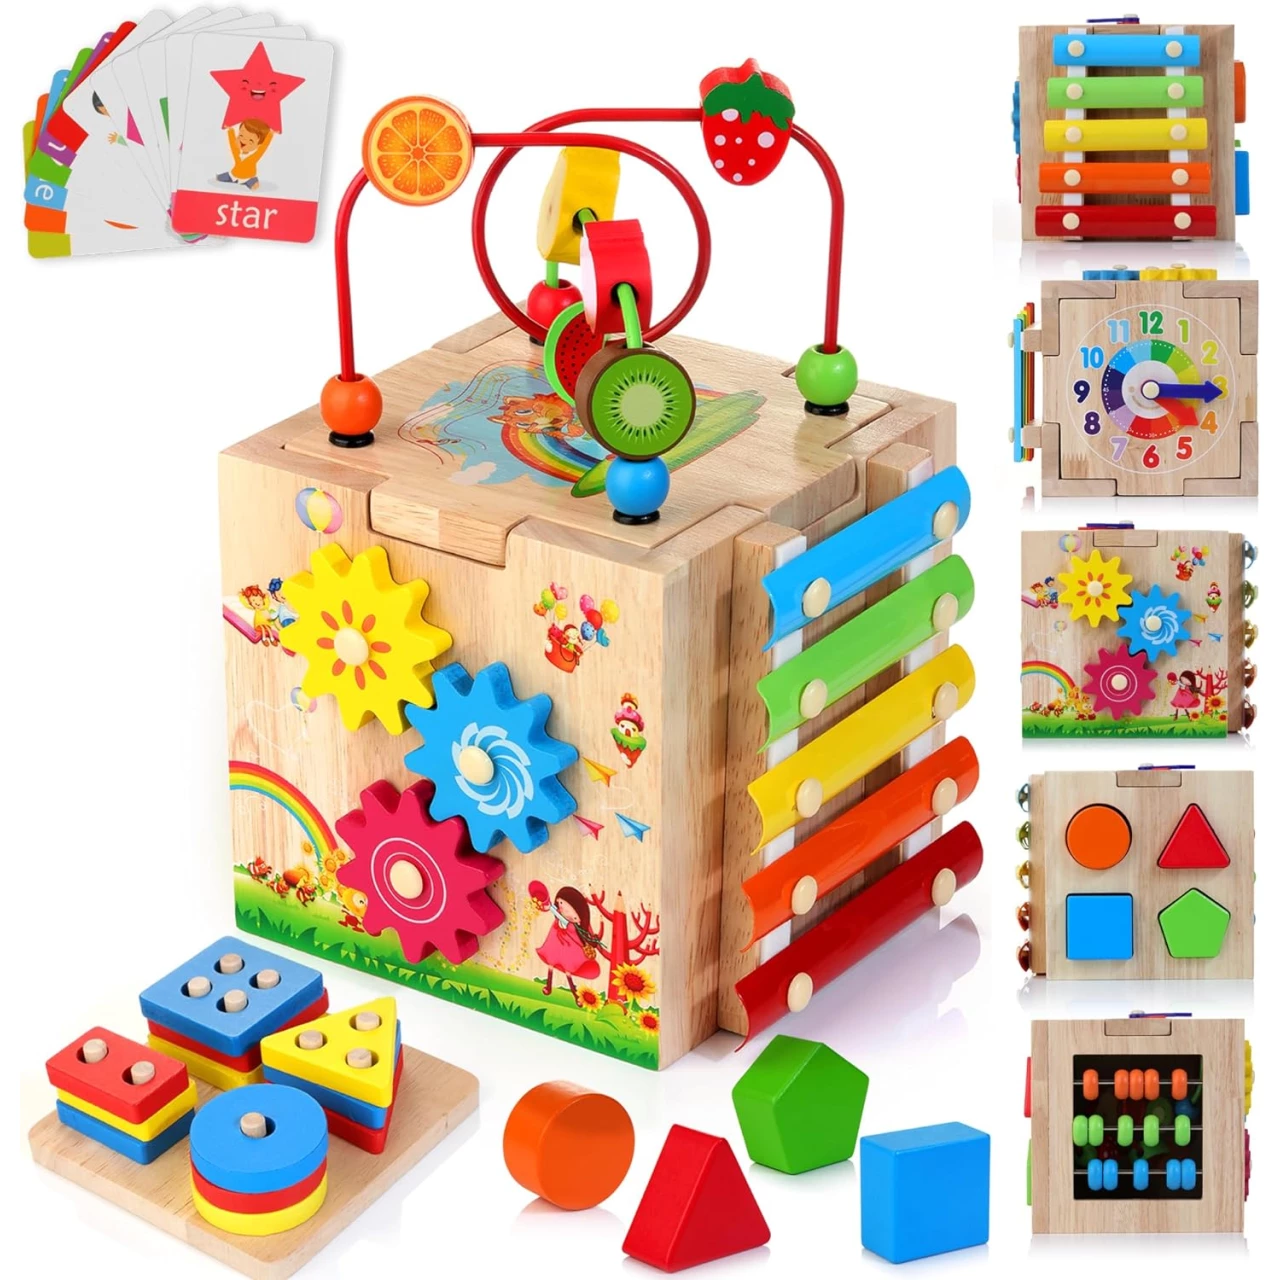 HELLOWOOD Wooden Activity Cube, 8-in-1 Montessori Toys for 1-3 Year Olds